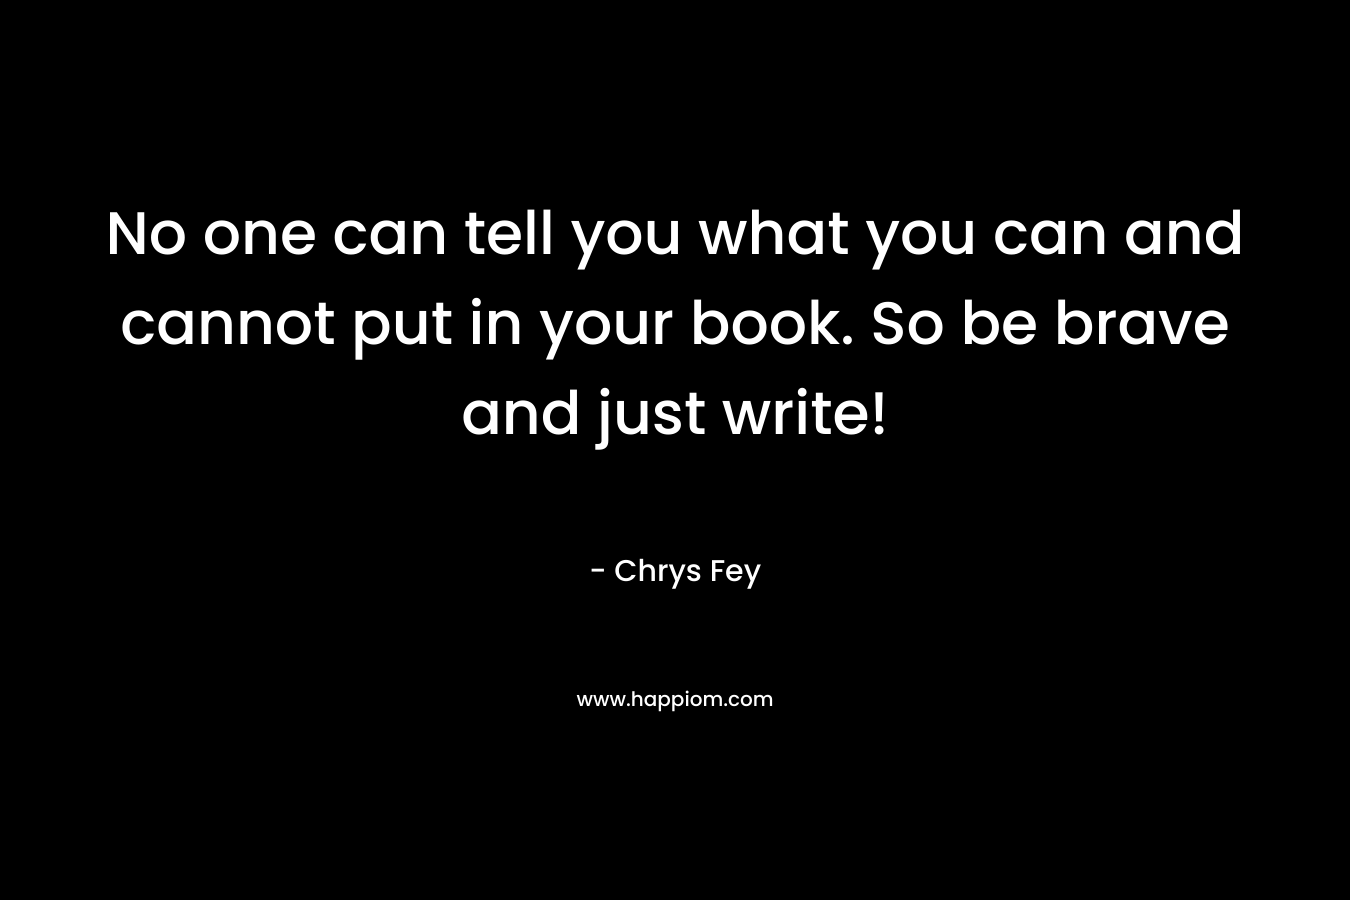 No one can tell you what you can and cannot put in your book. So be brave and just write!